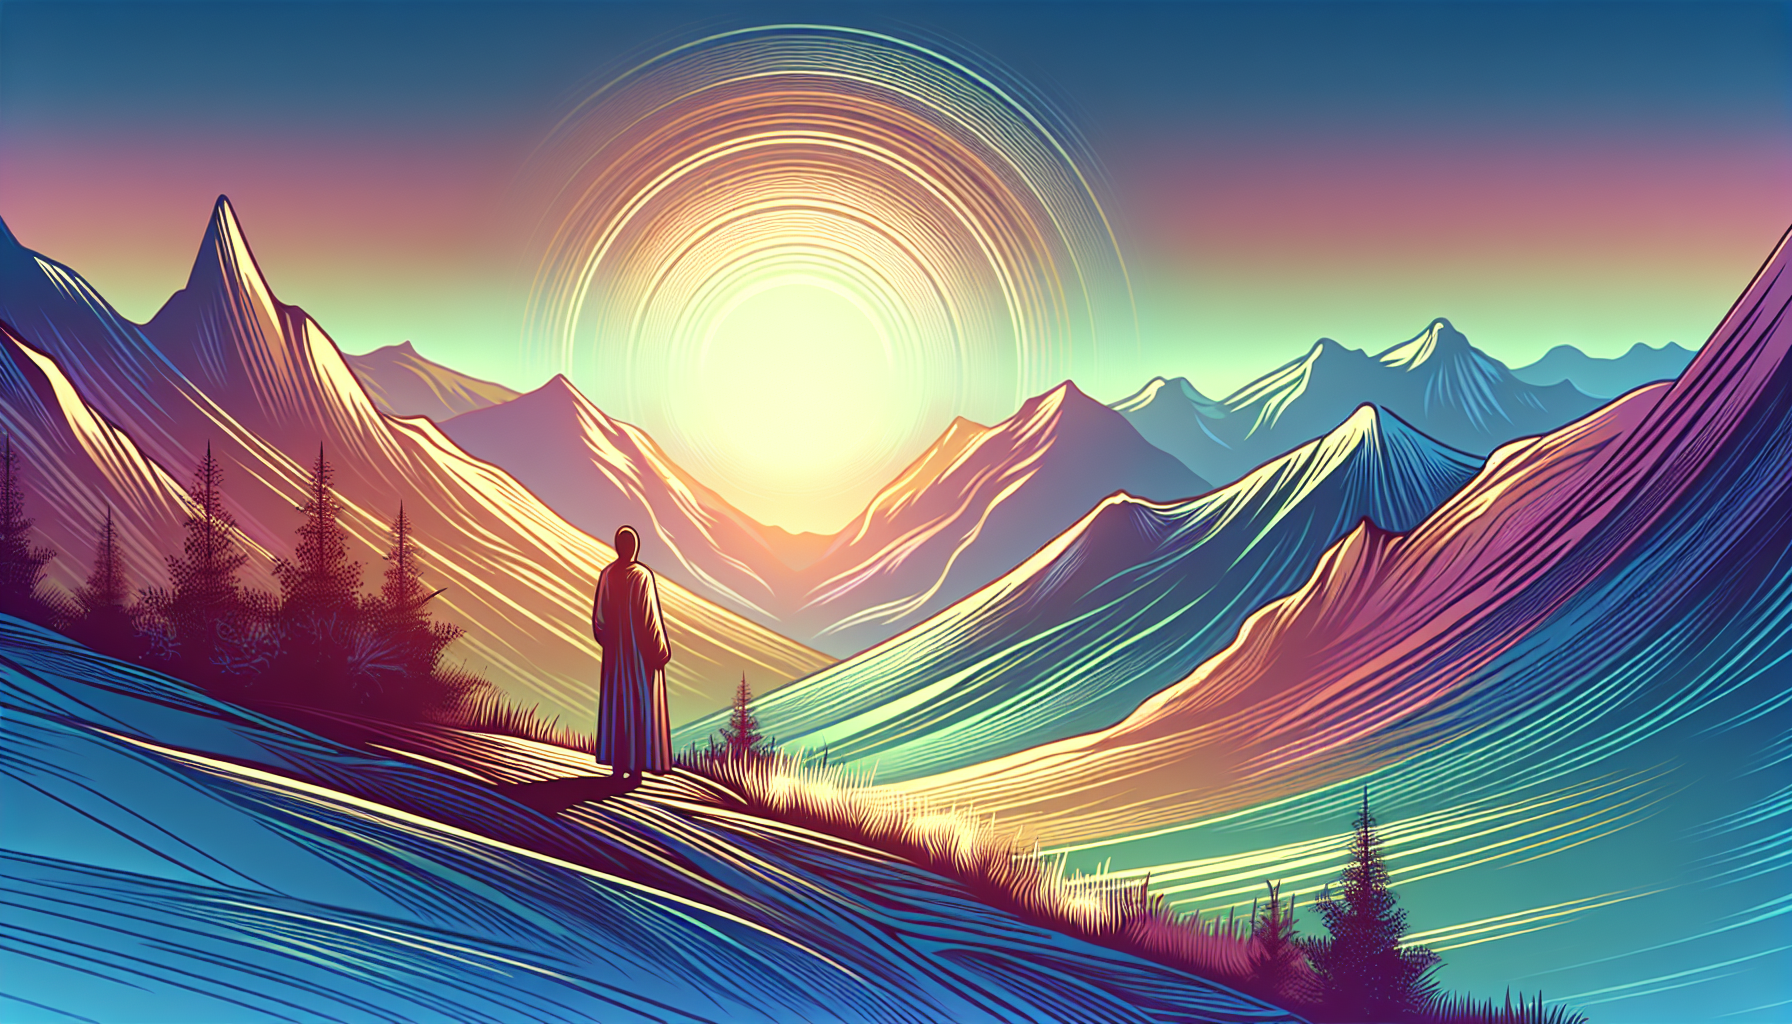 Painting of a serene mountain landscape at sunrise, illustrating Psalm 121:1-2 with a person looking up towards the glowing sky, symbolizing seeking help from above, in an ethereal, soft color palette